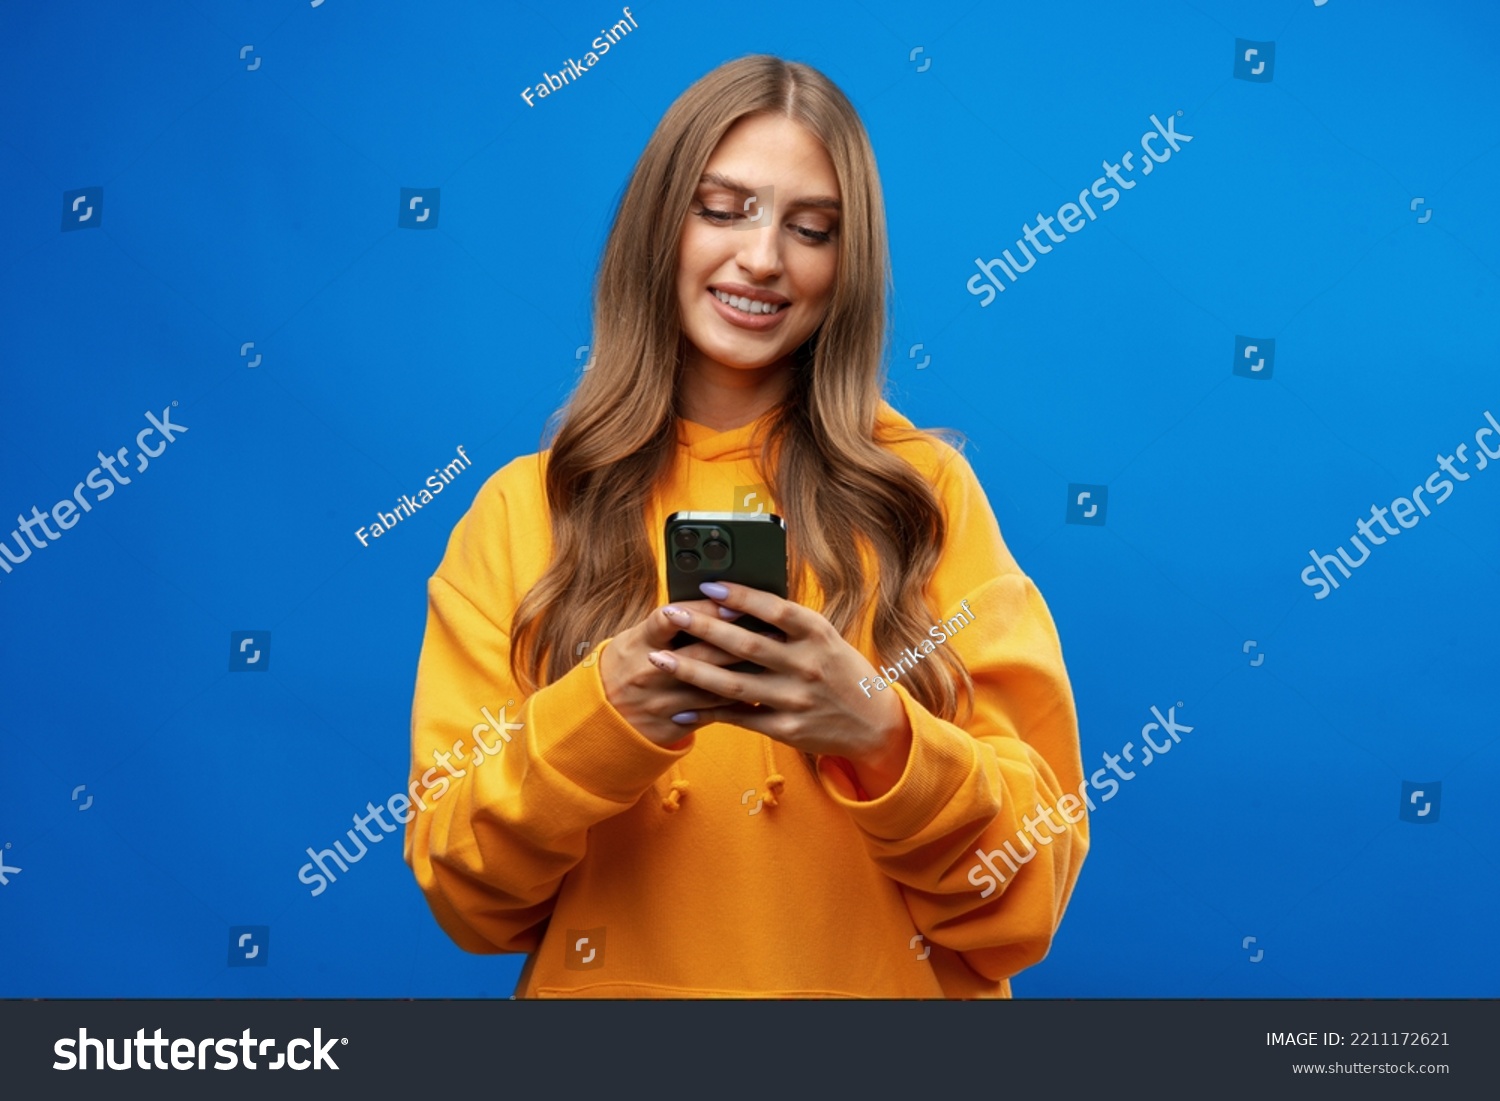 Portrait of young beautiful woman texting on the phone against blue background #2211172621